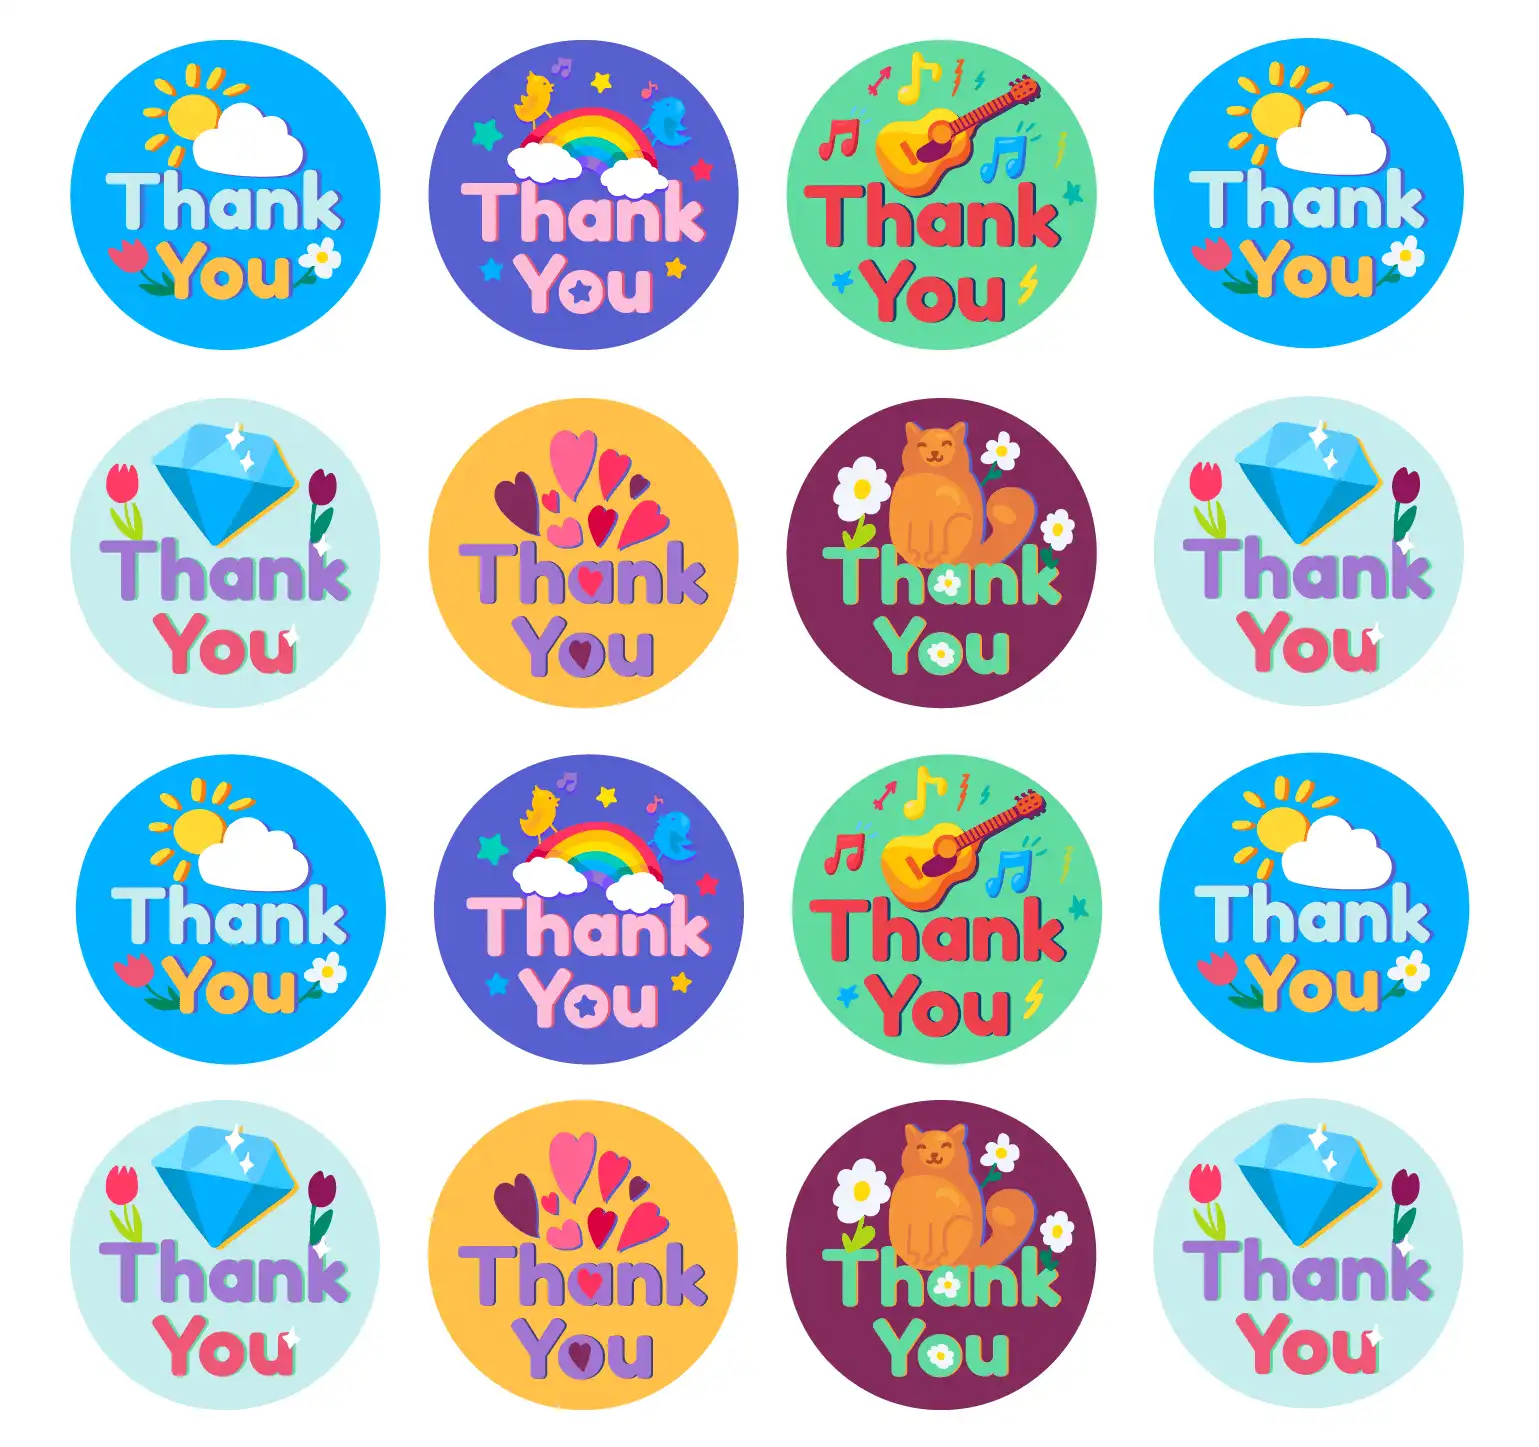 Thank you Stickers